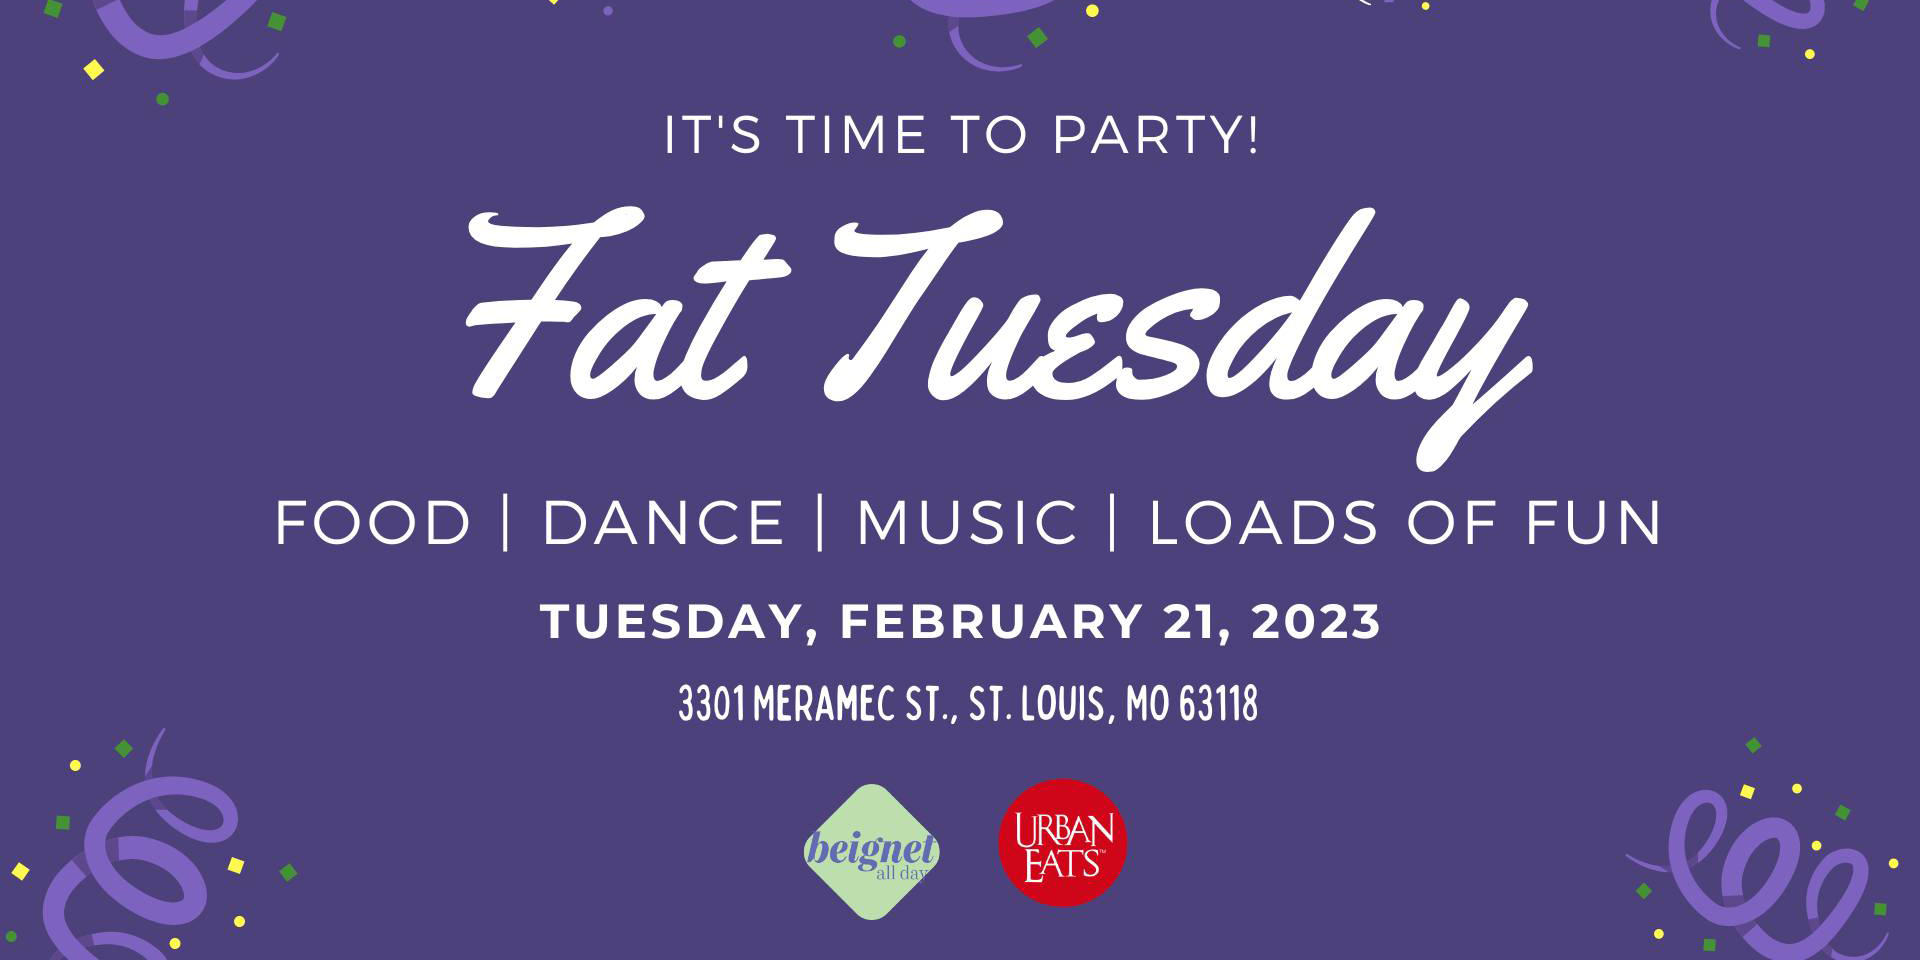 Celebrate Fat Tuesday with Beignet All Day at Urban Eats in Dutchtown.